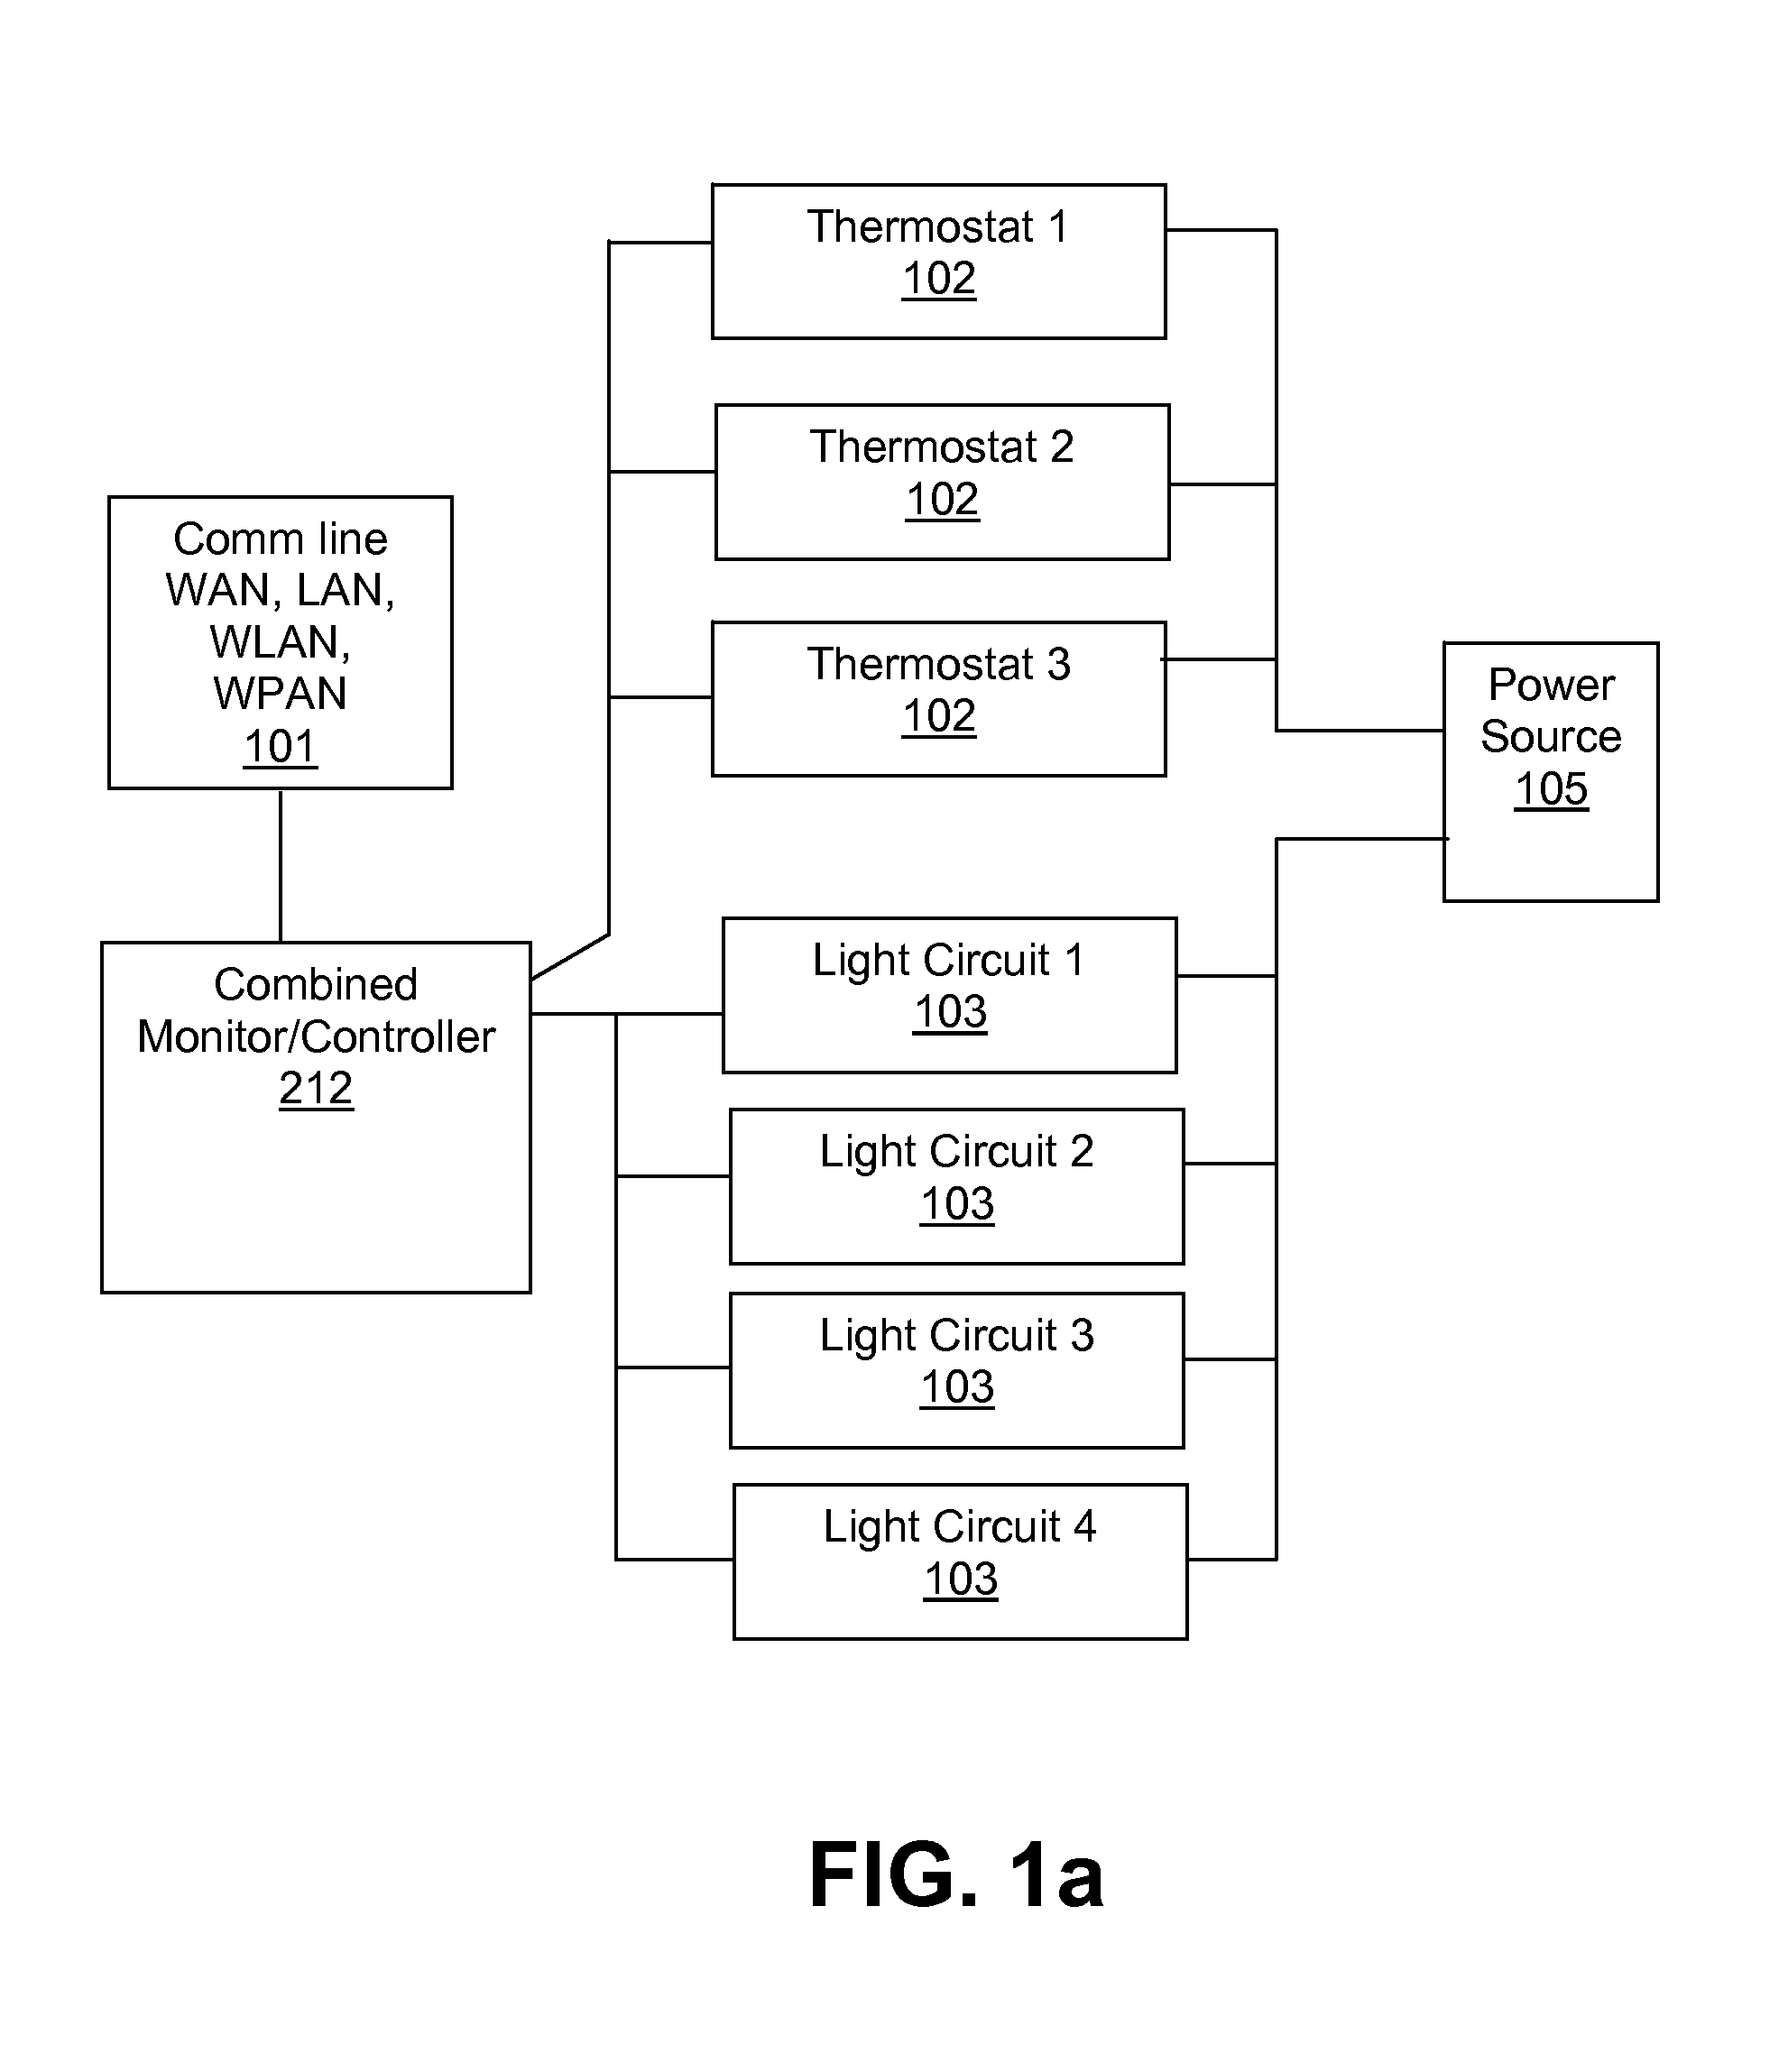 Energy management system and method to monitor and control multiple sub-loads